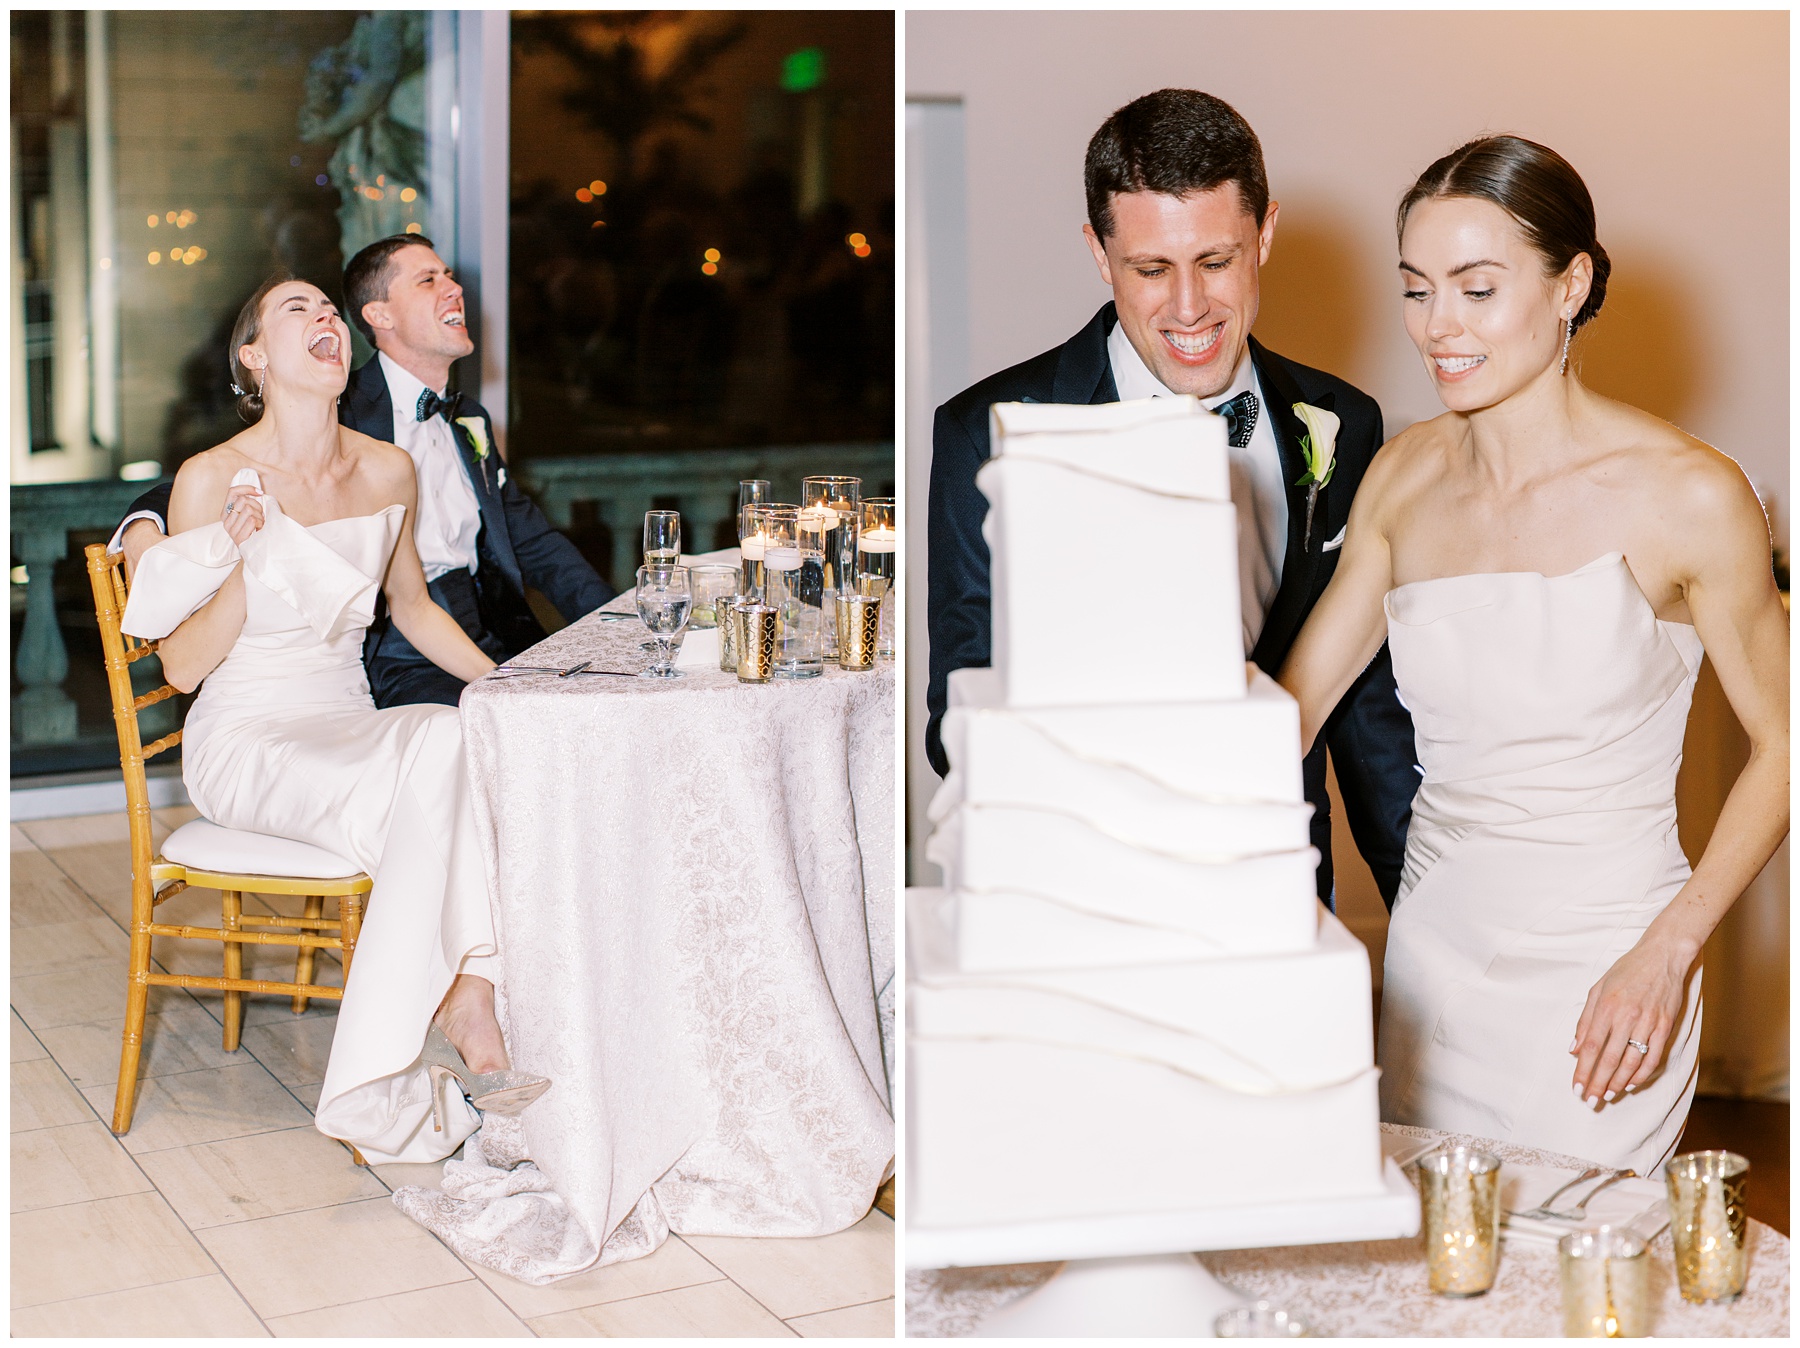 newlyweds laugh during toasts and cut wedding cake at NC reception 